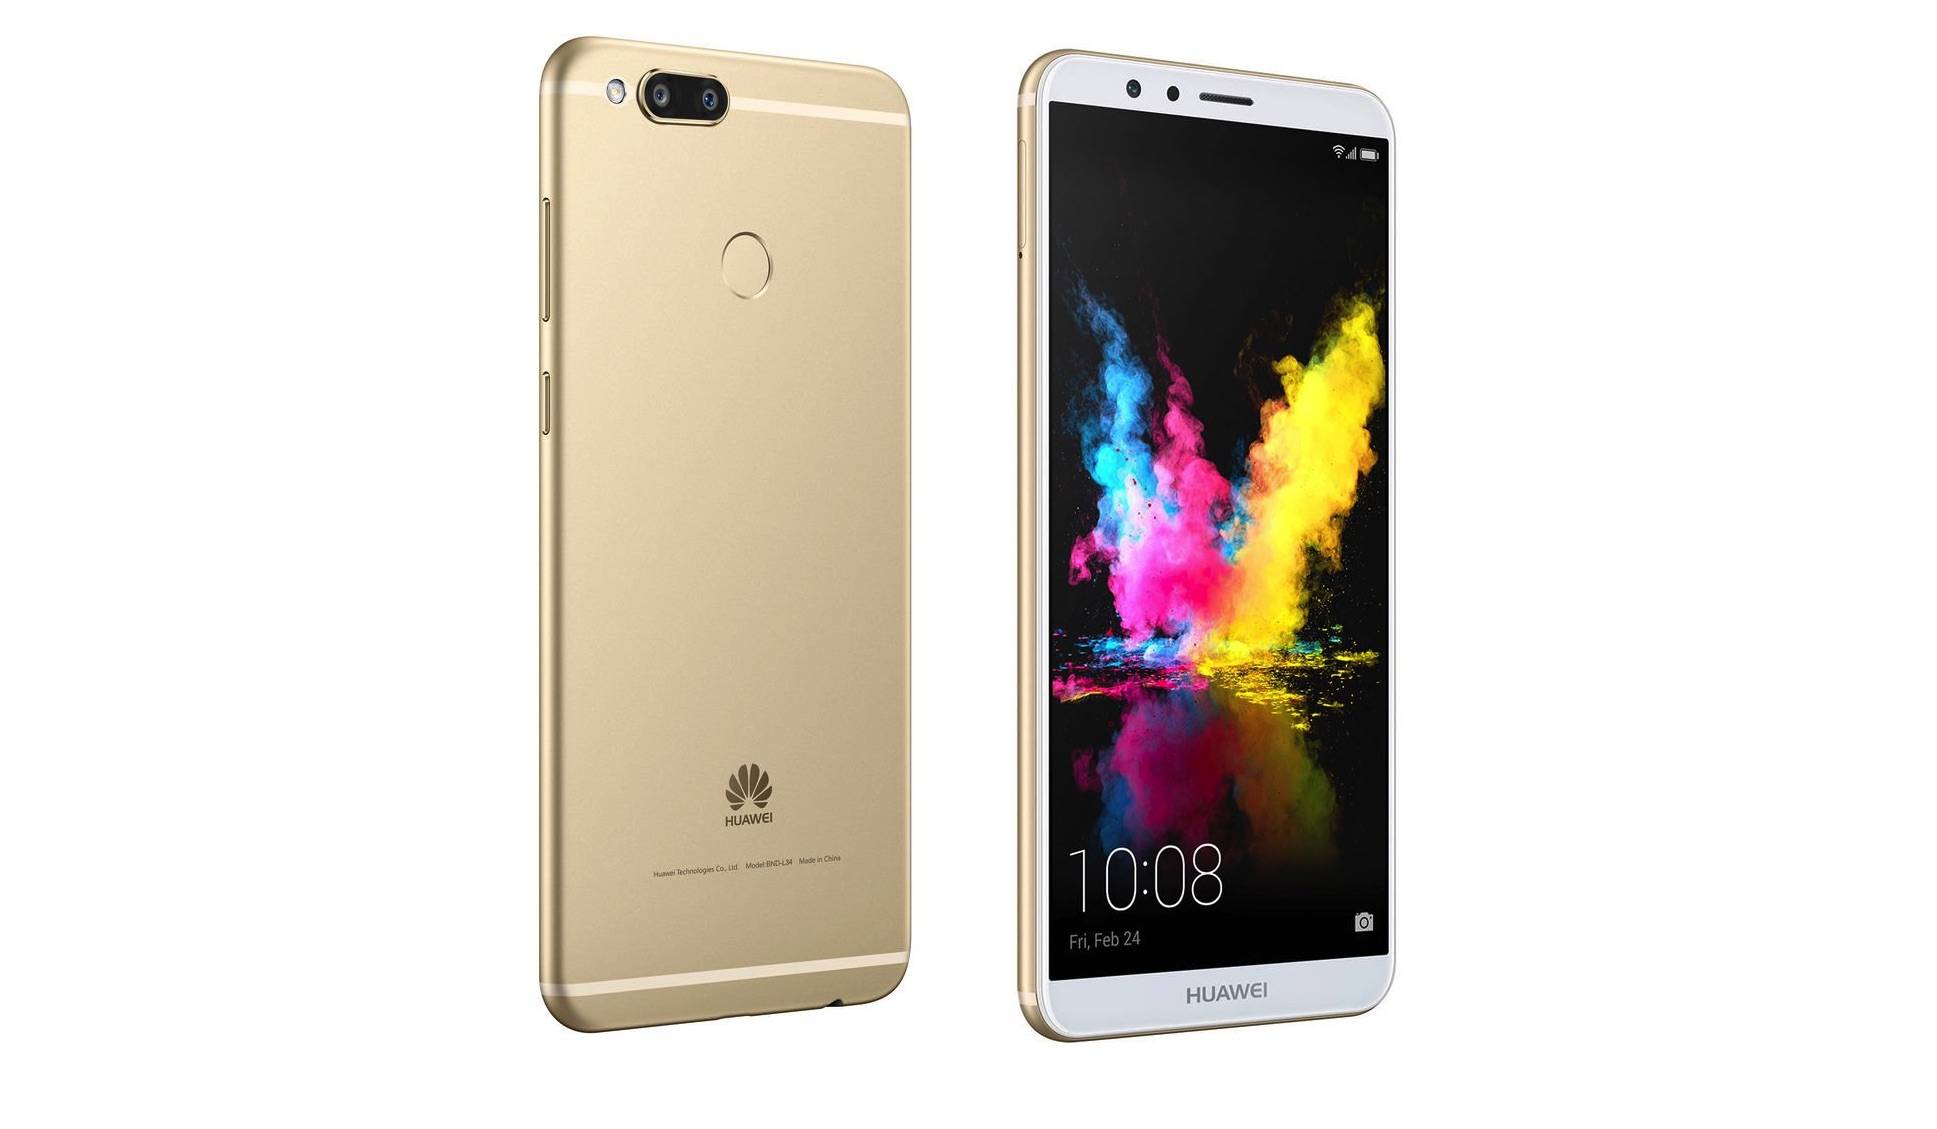 Huawei rebrands Honor 7X as Mate SE for US release - Android Community